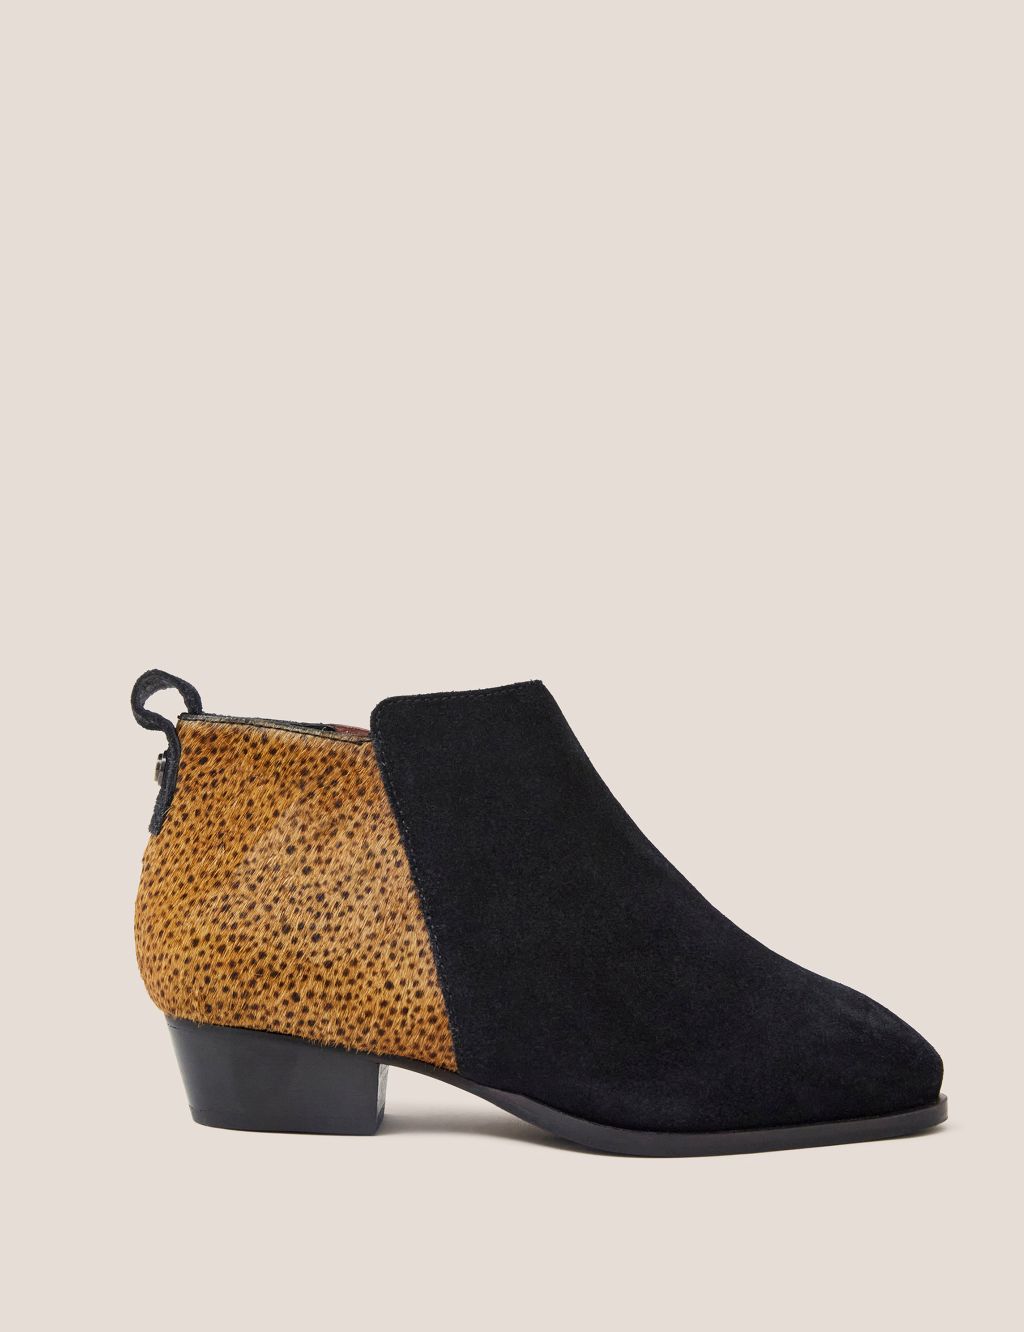 Wide Fit Suede Animal Print Ankle Boots image 1